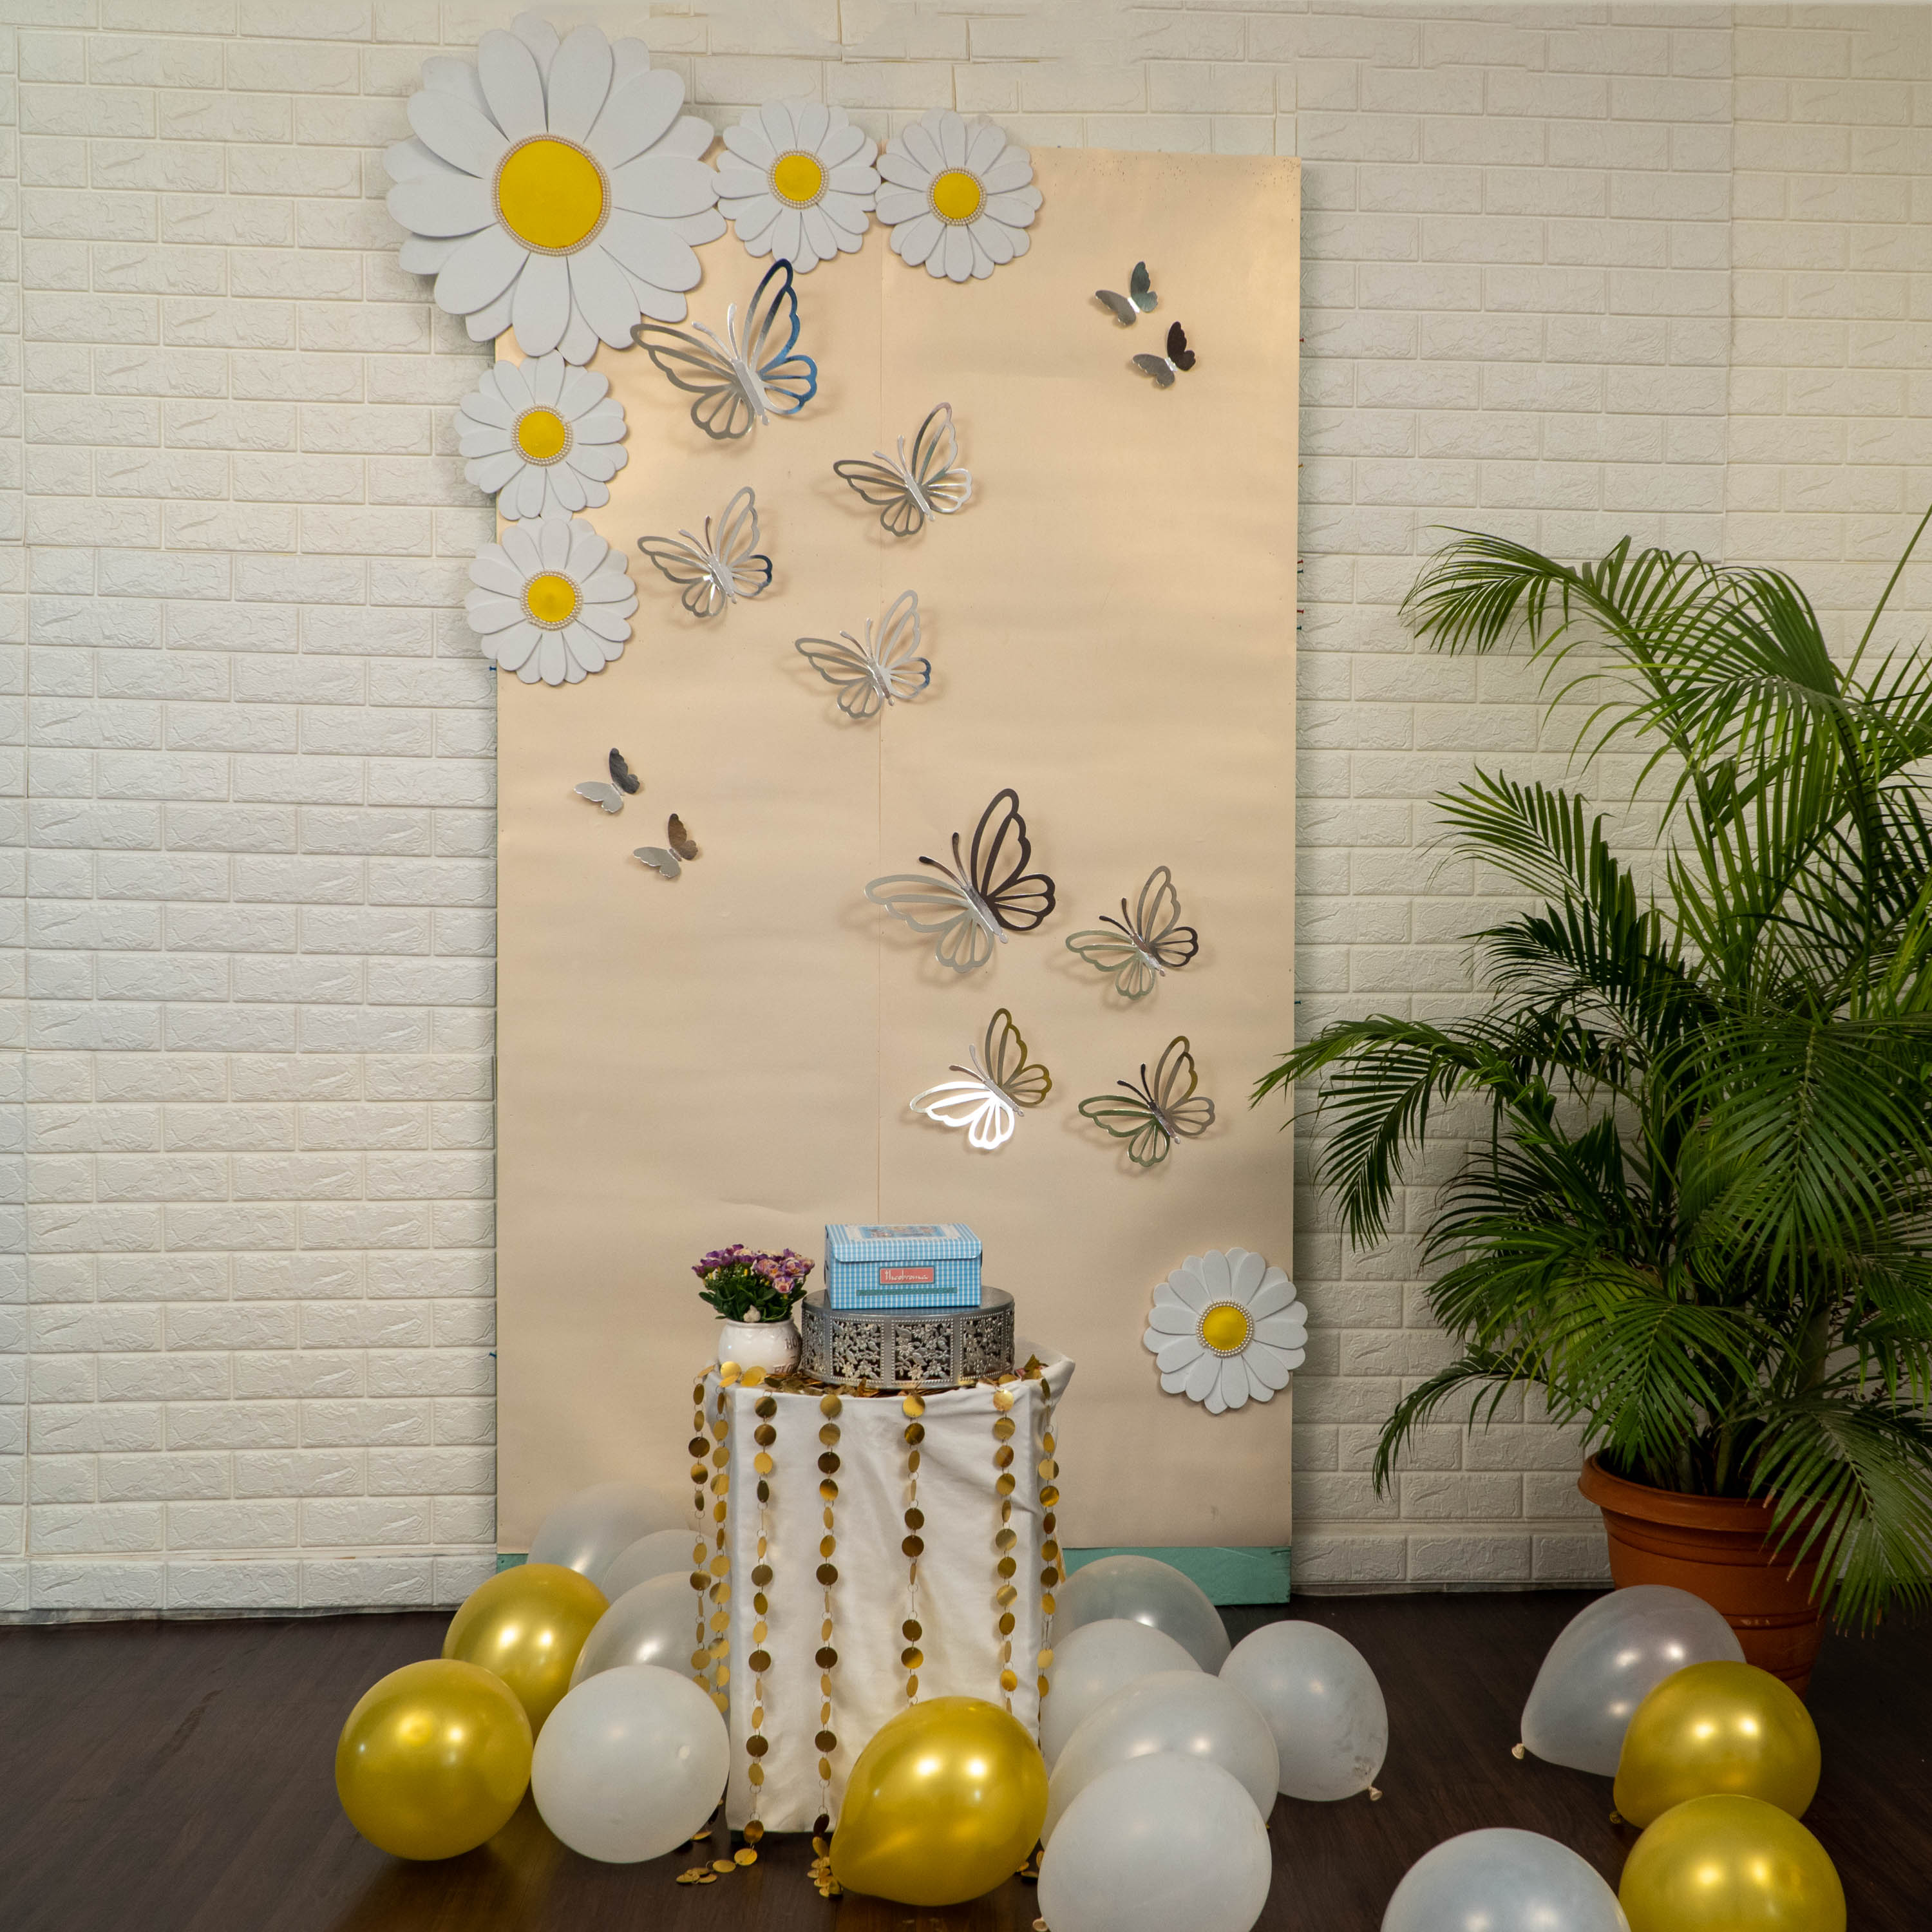 Annaprasana and Bridal Shower Backdrop Decor Kit online in the USA